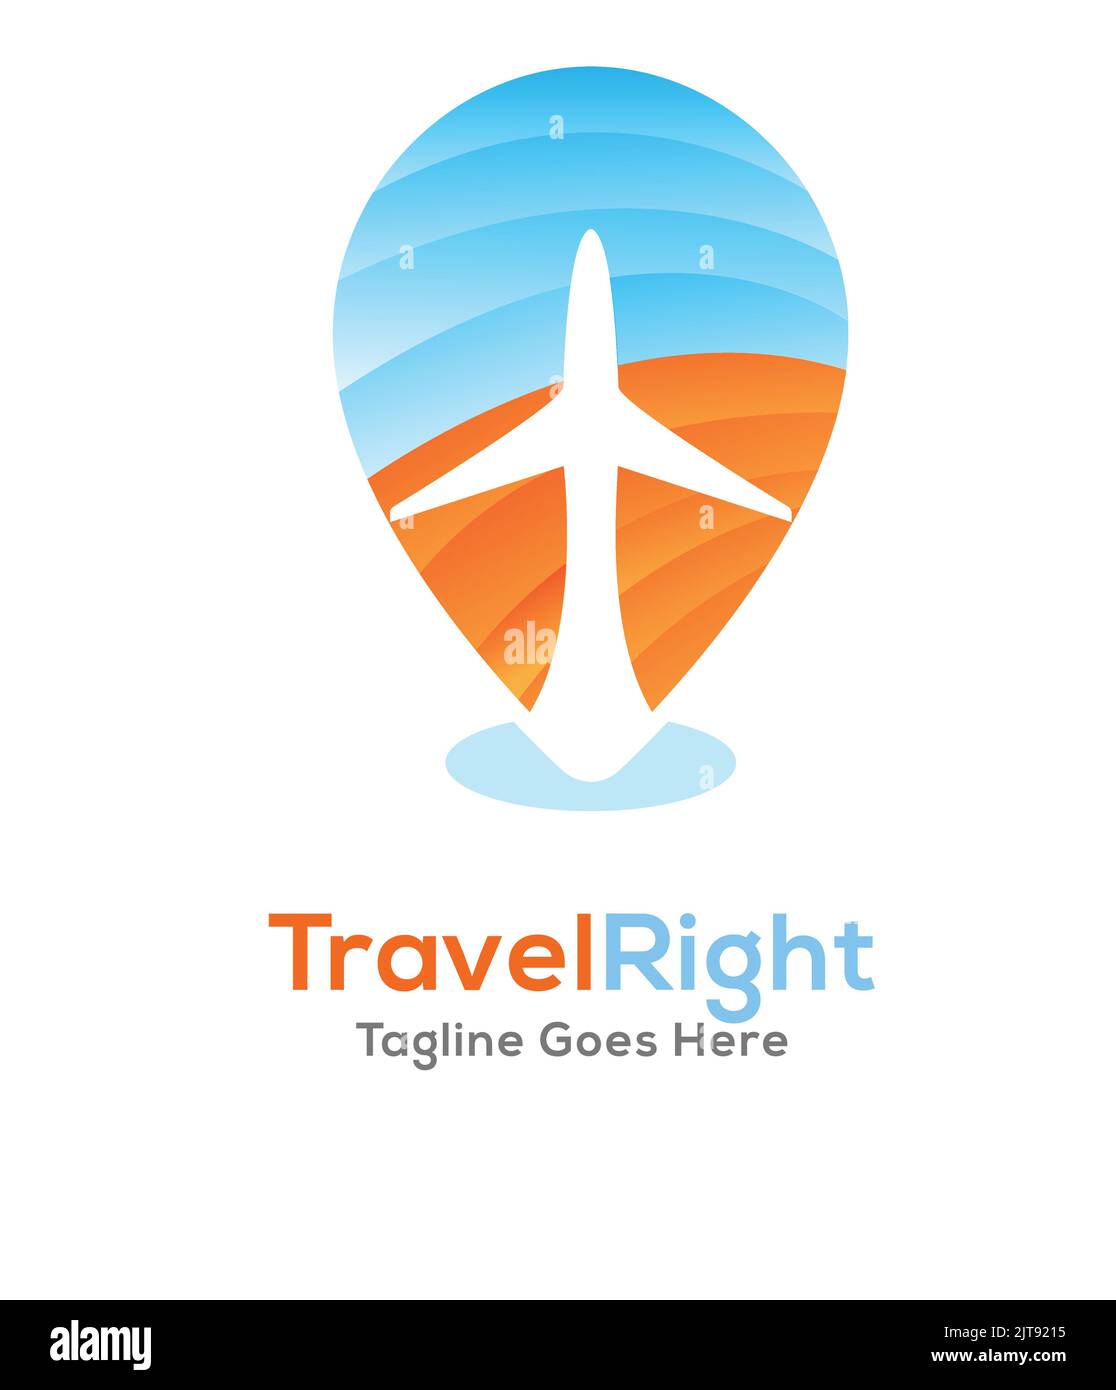 travel company logo tourism airline logo vacation holiday travel fly journey airplane business vector graphic logo transportation flight Stock Vector